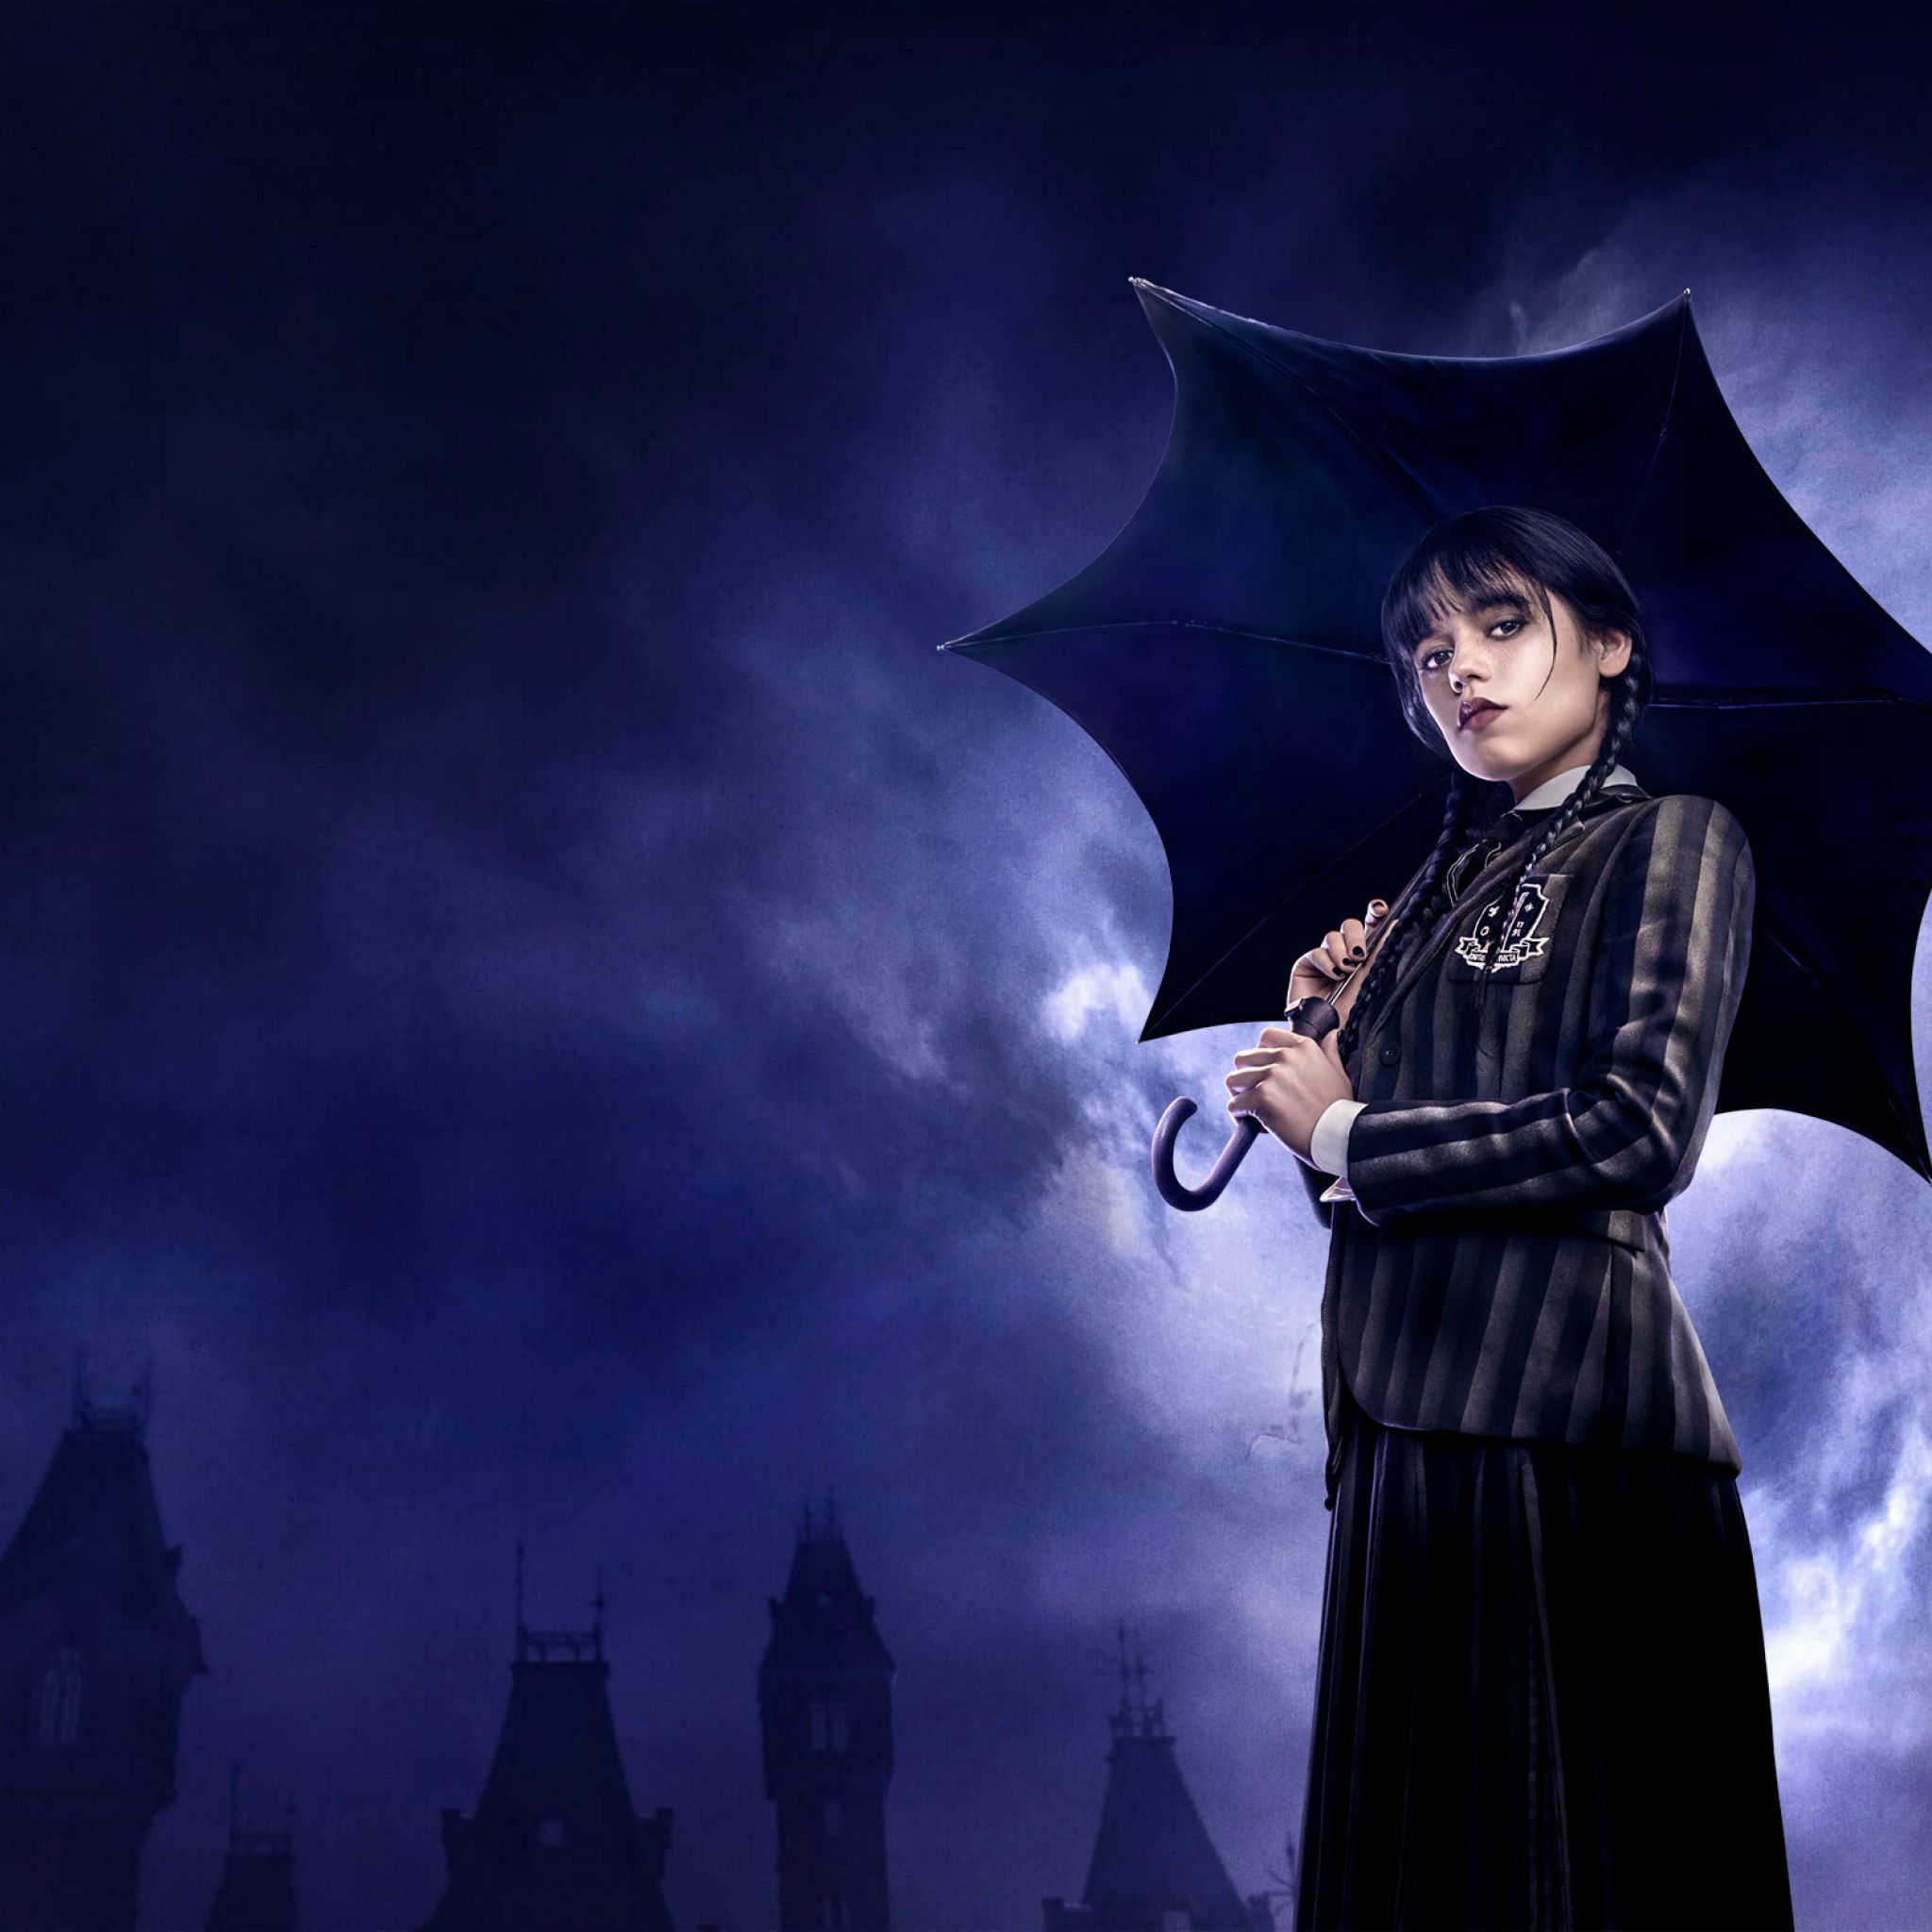 Wednesday Addams Wallpapers  Top 30 Best Wednesday Addams Wallpapers  Download